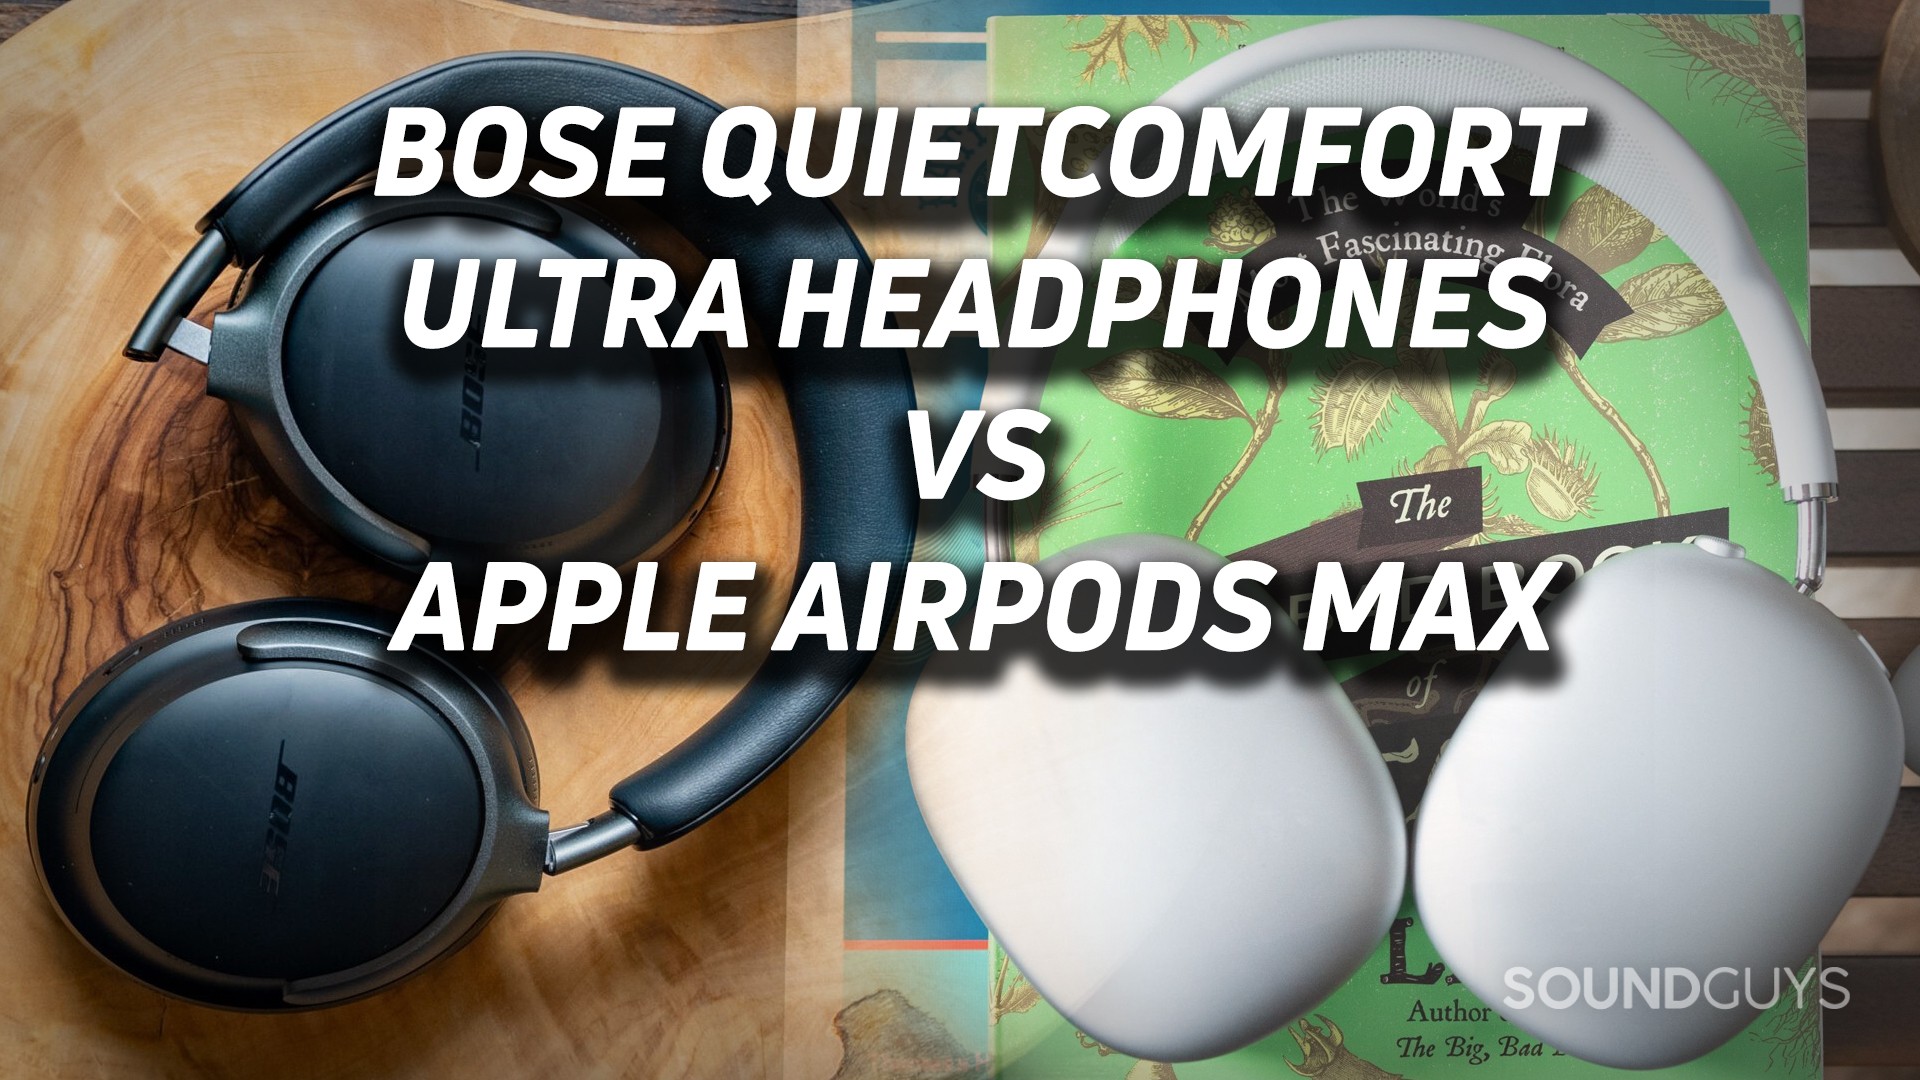 Two overlaid images show the Bose QuietComfort Ultra Headphones and Apple AirPods Max with text overlaid.